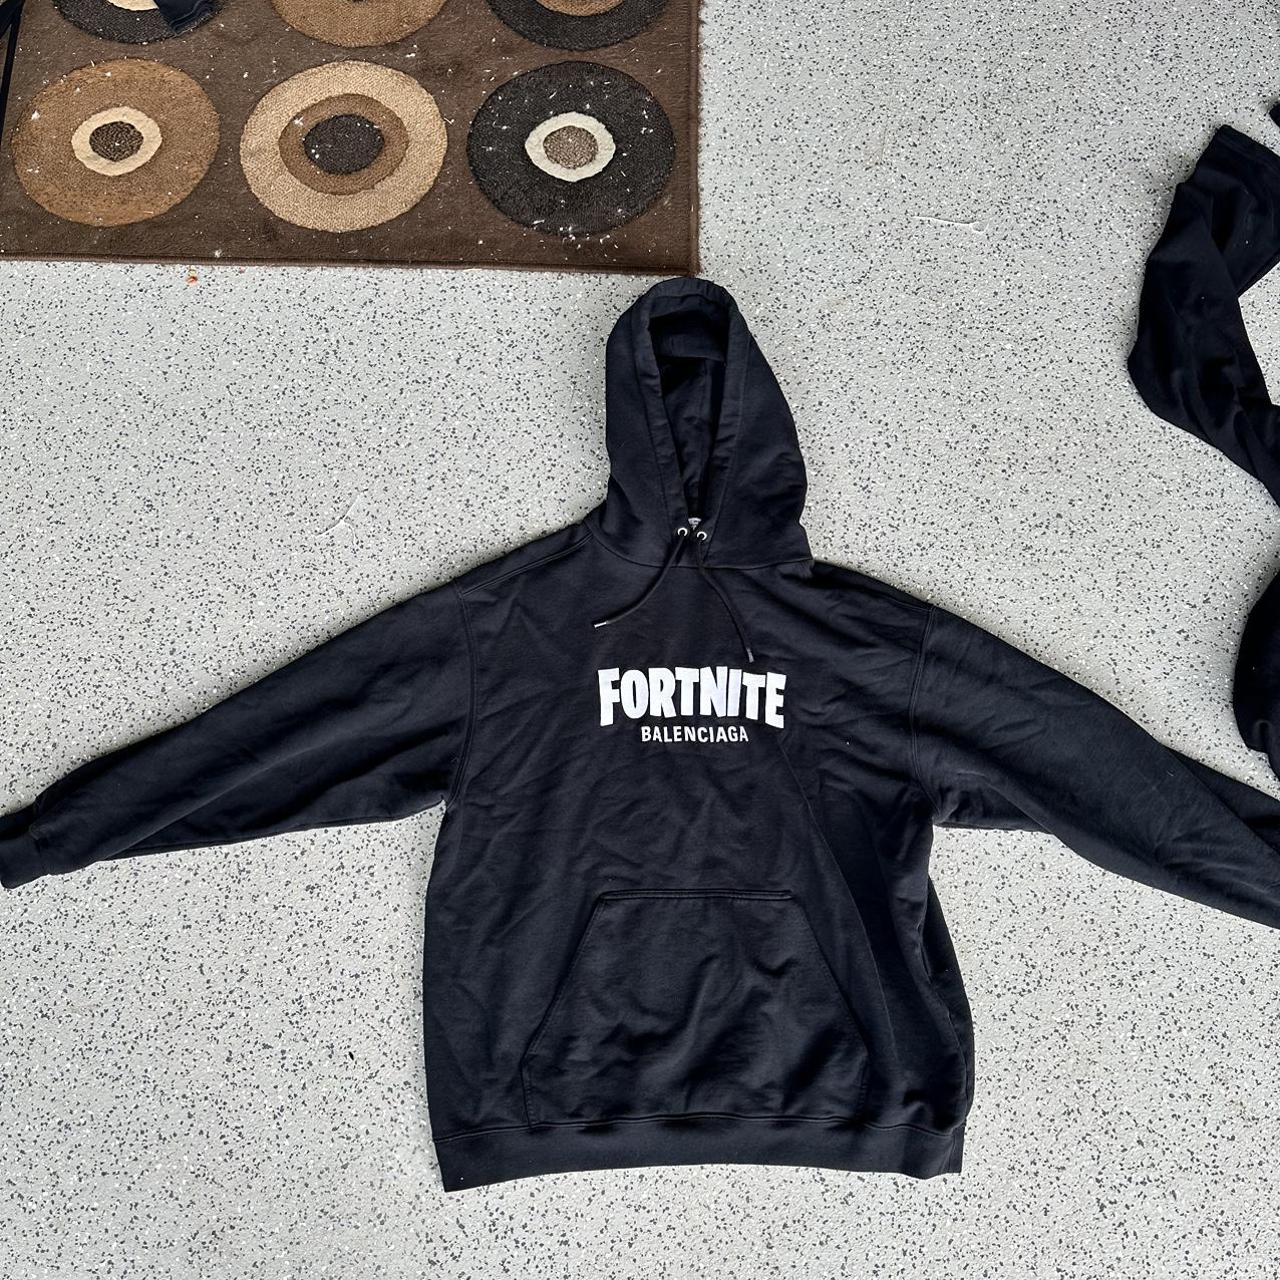 NWT and 100 AUTHENTIC BALENCIAGA FORTNITE LOGO HOODIE S SIZE FIT M  eBay